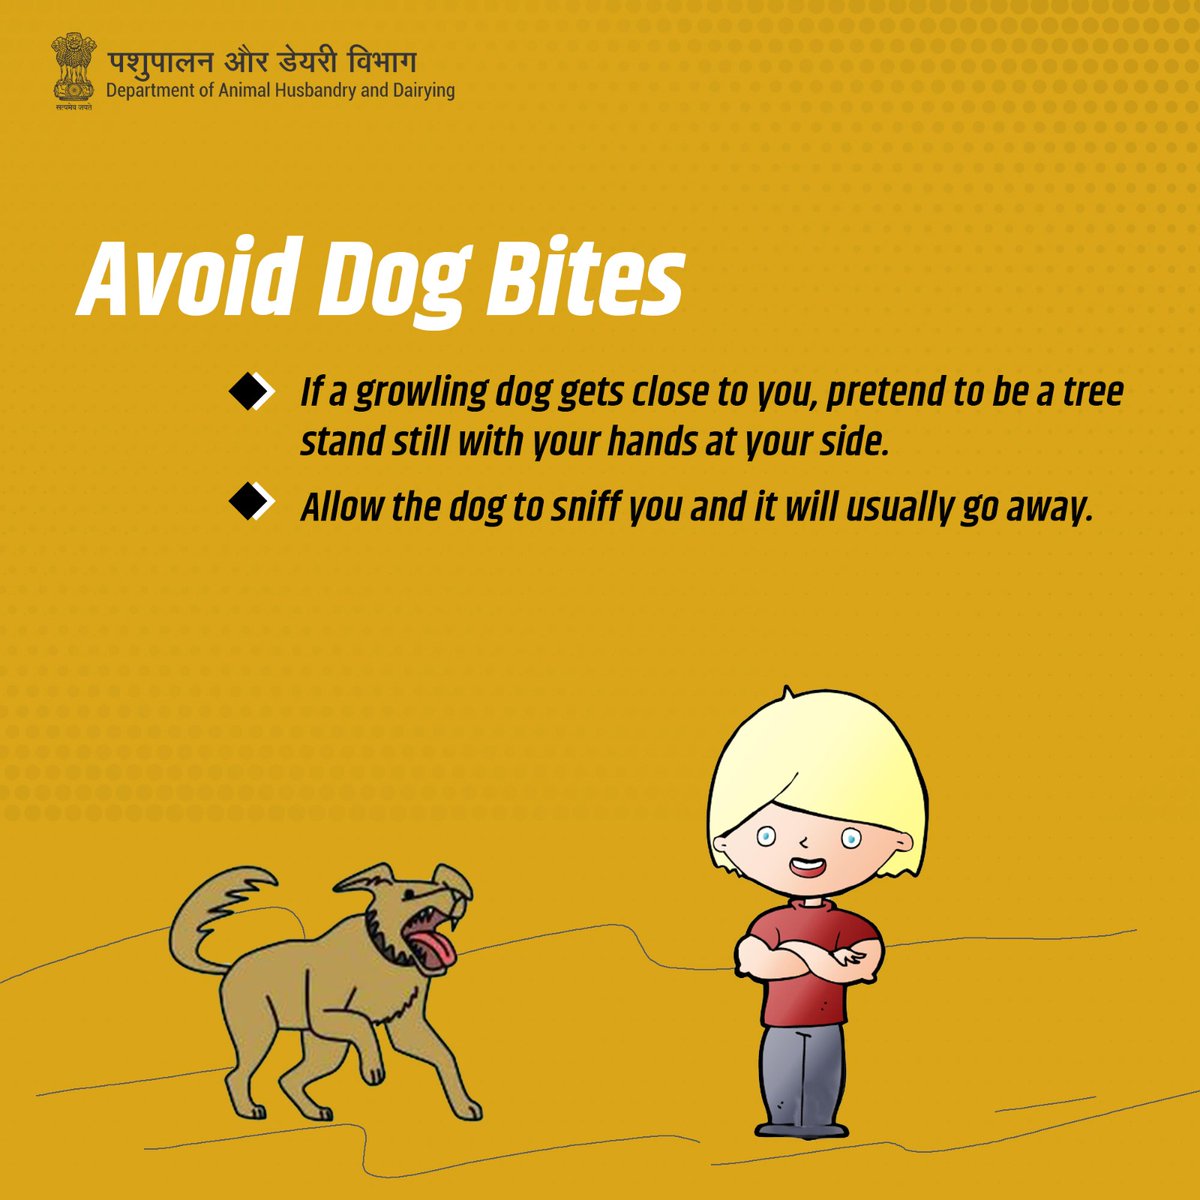 Stay calm and be a tree to avoid dog bites; let them sniff and move on. #avoiddogbites #PreventRabies #VaccinateNow